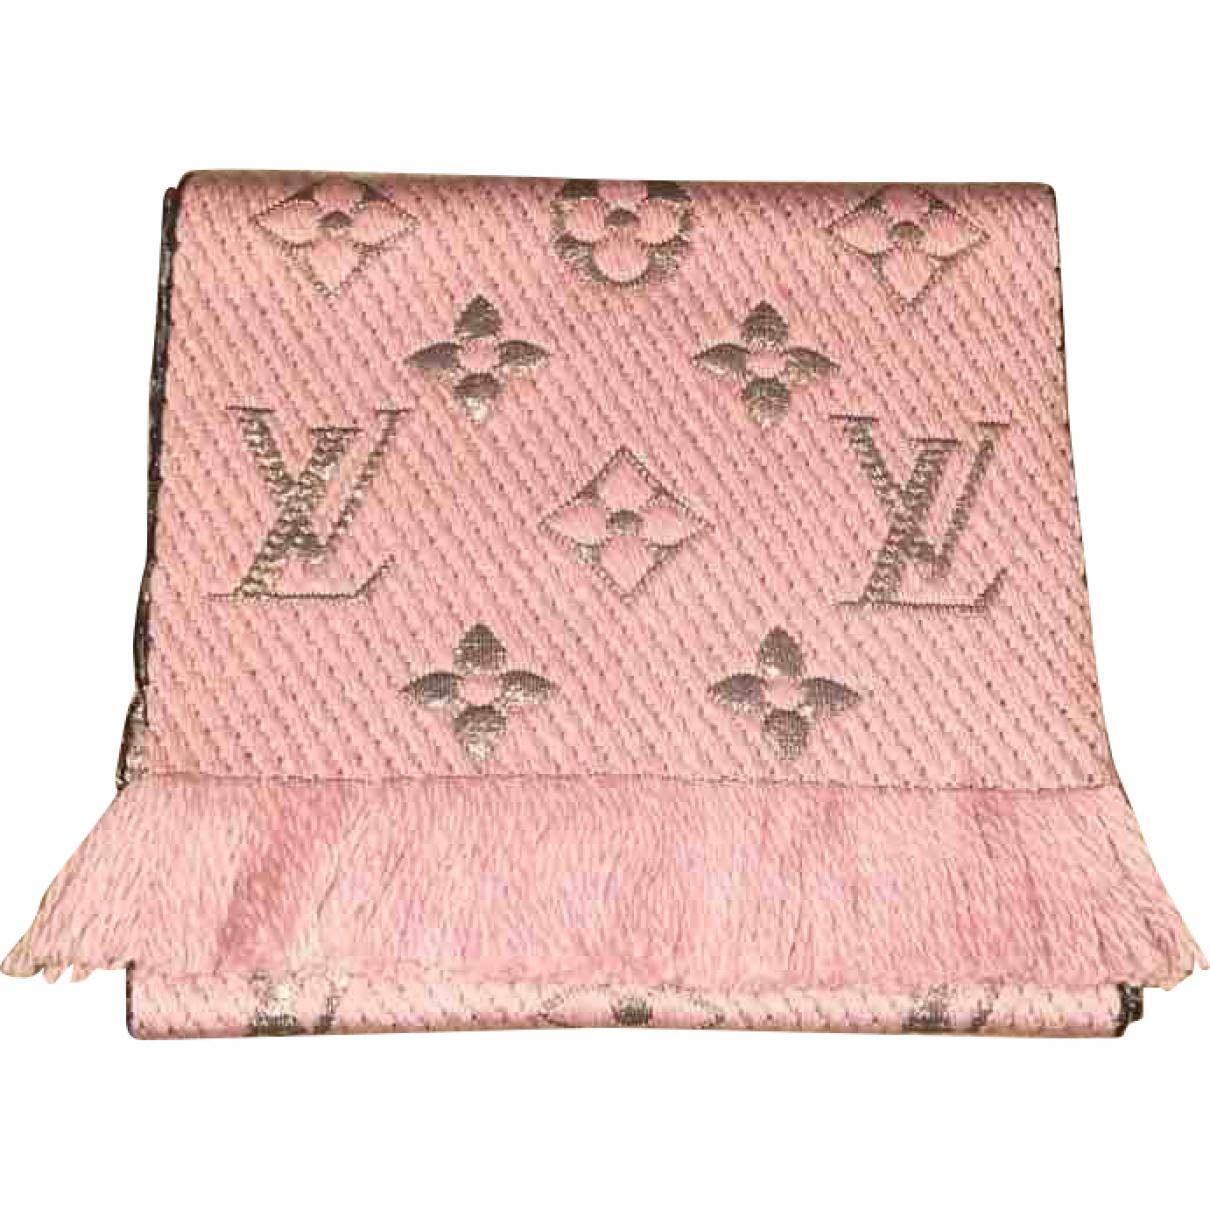 Lyst - Louis Vuitton Logomania Pink Wool Scarves in Pink - Save 2%